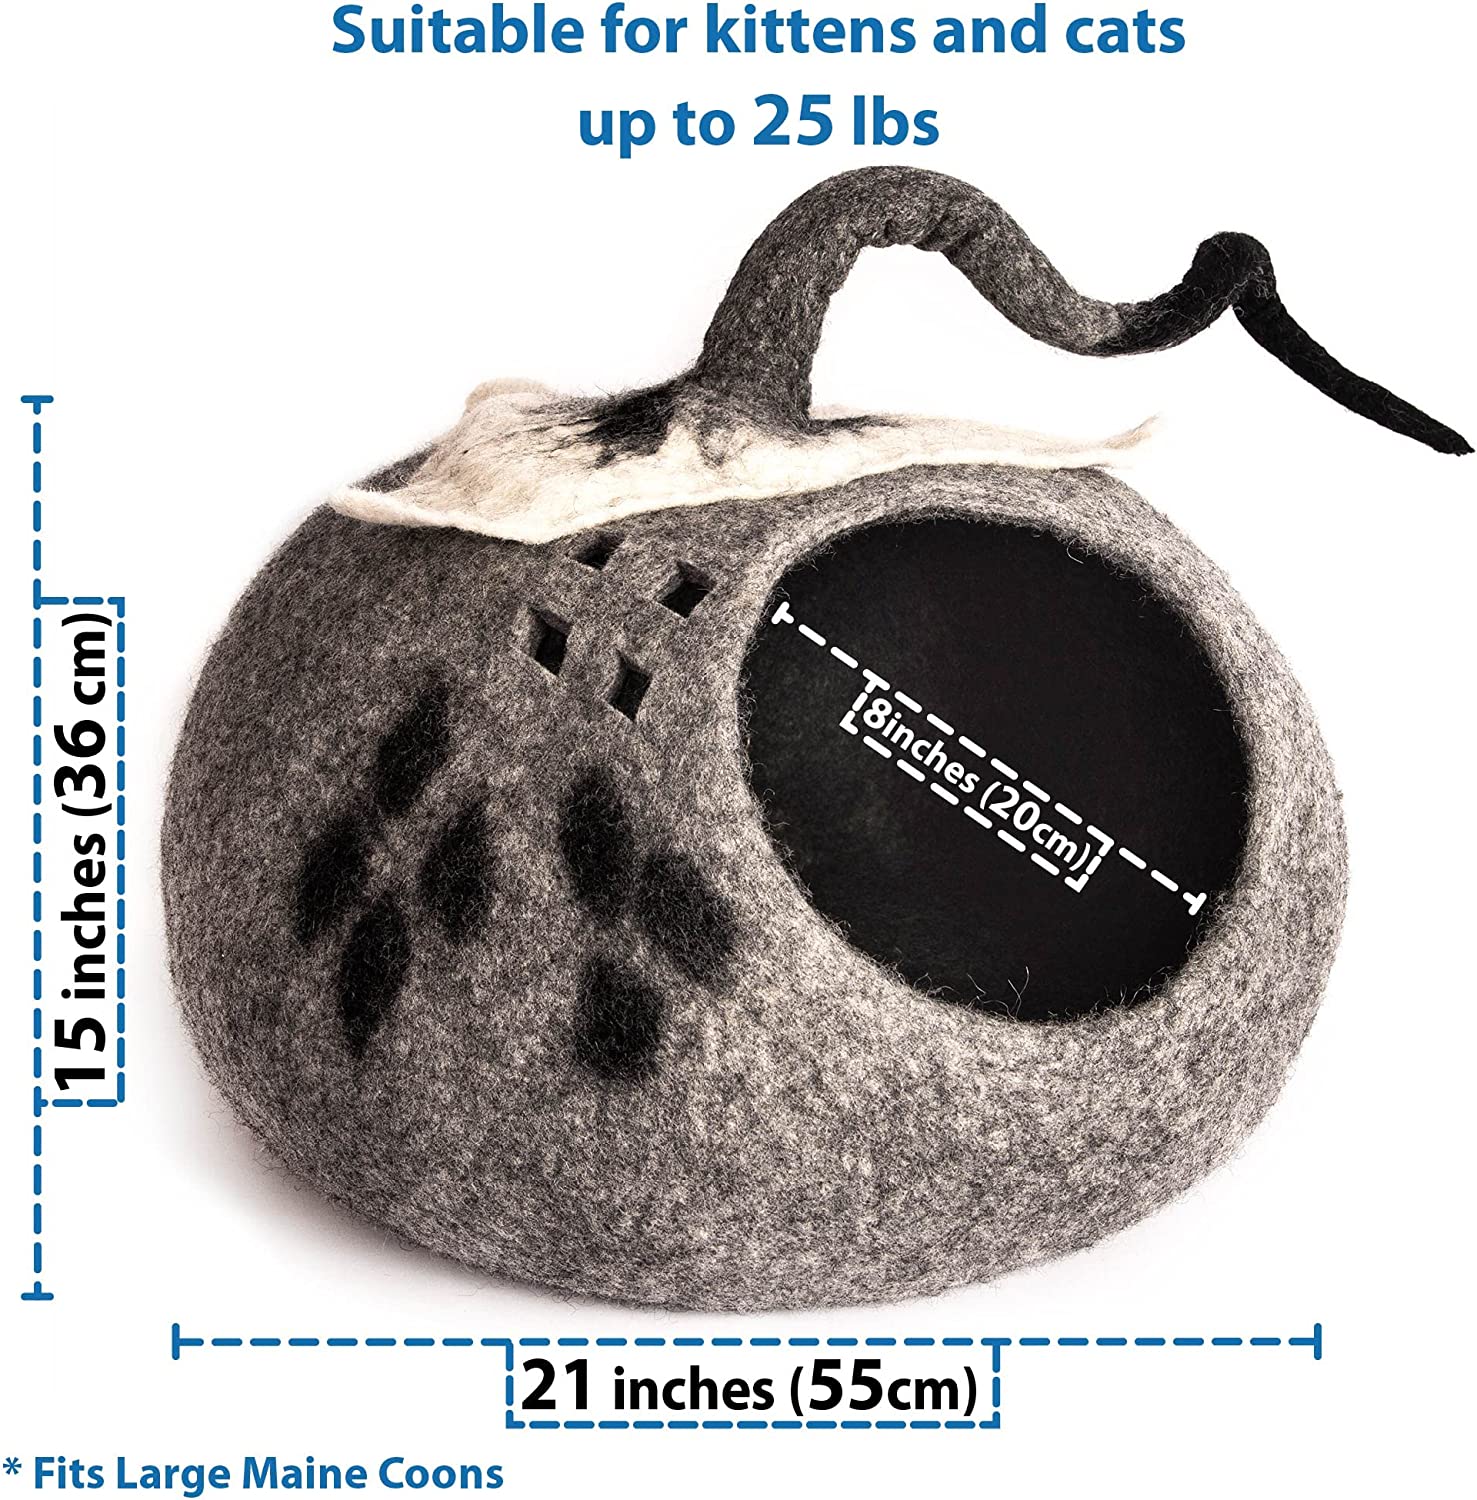 cat cave suitable for kittens and cats up to 25 lbs